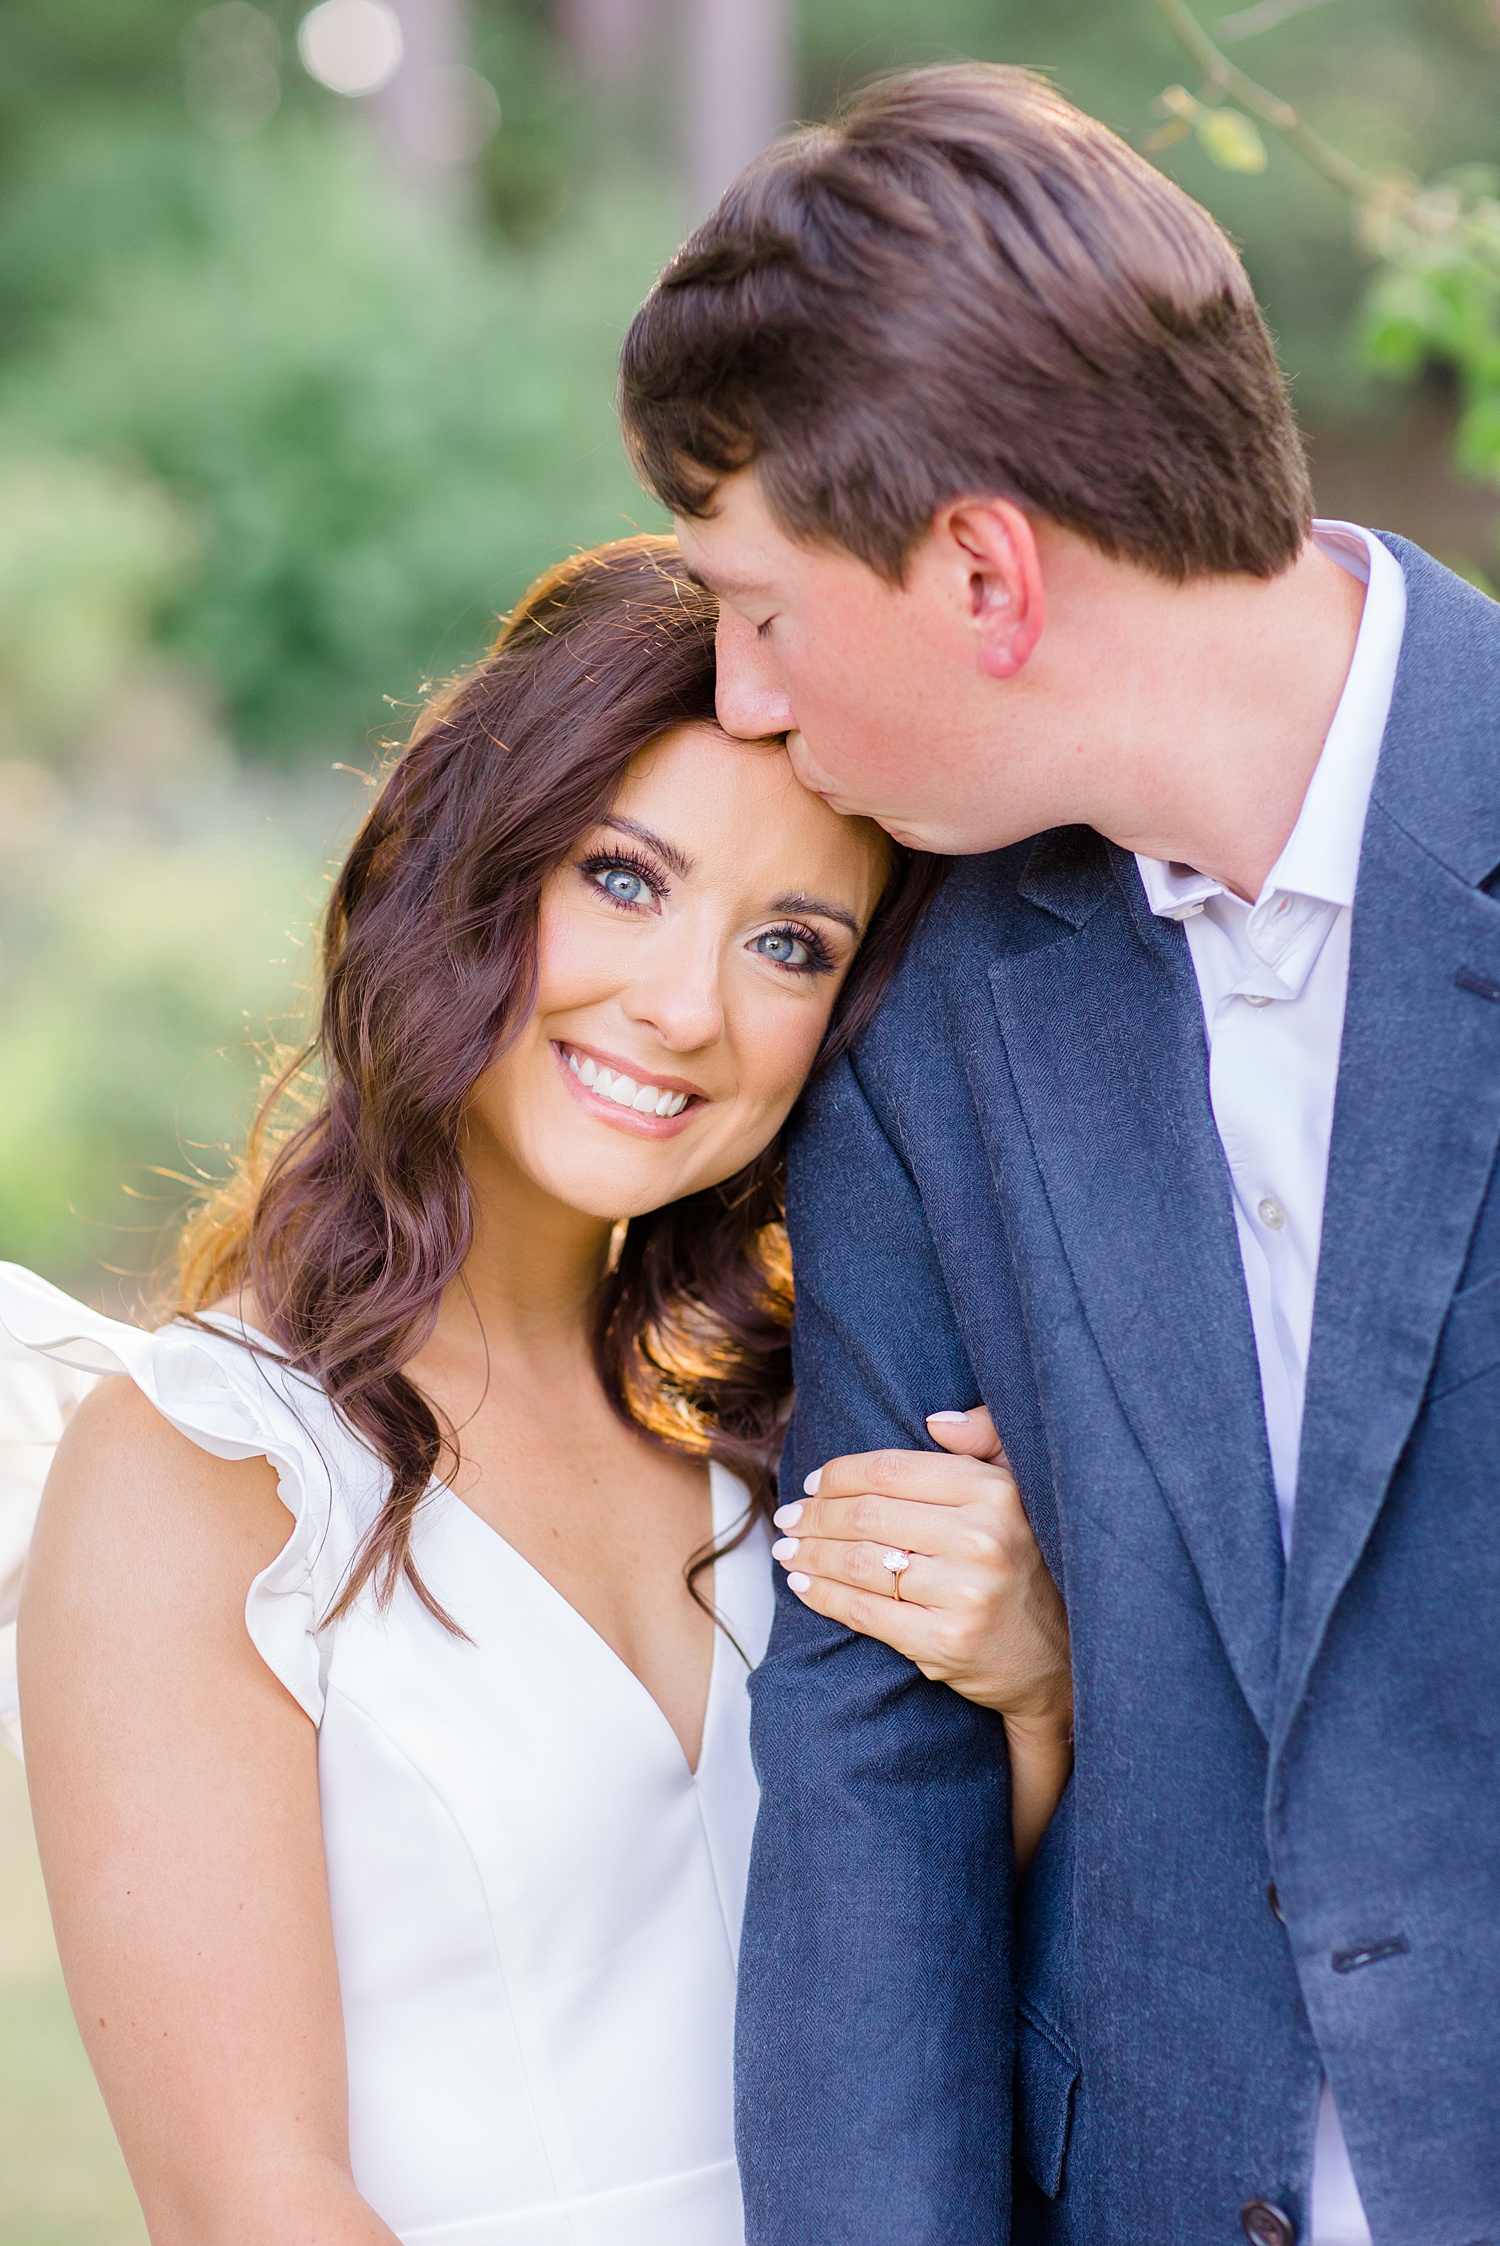 man kisses his fiance's forehead during engagement session